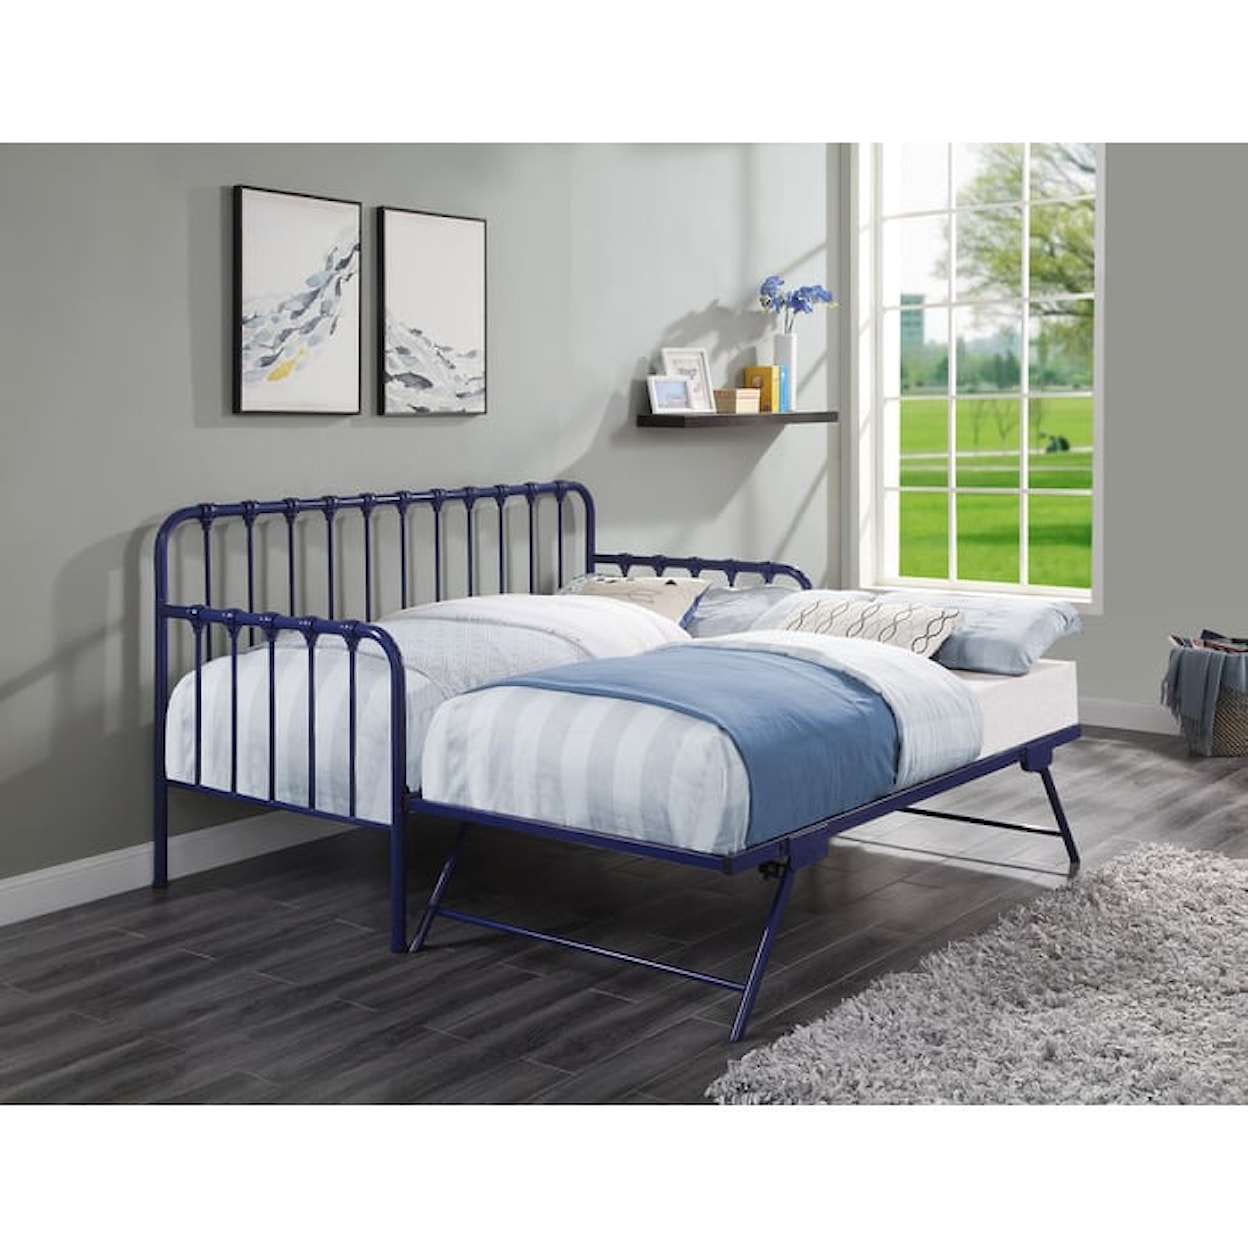 Homelegance Constance Daybed with Lift-up Trundle